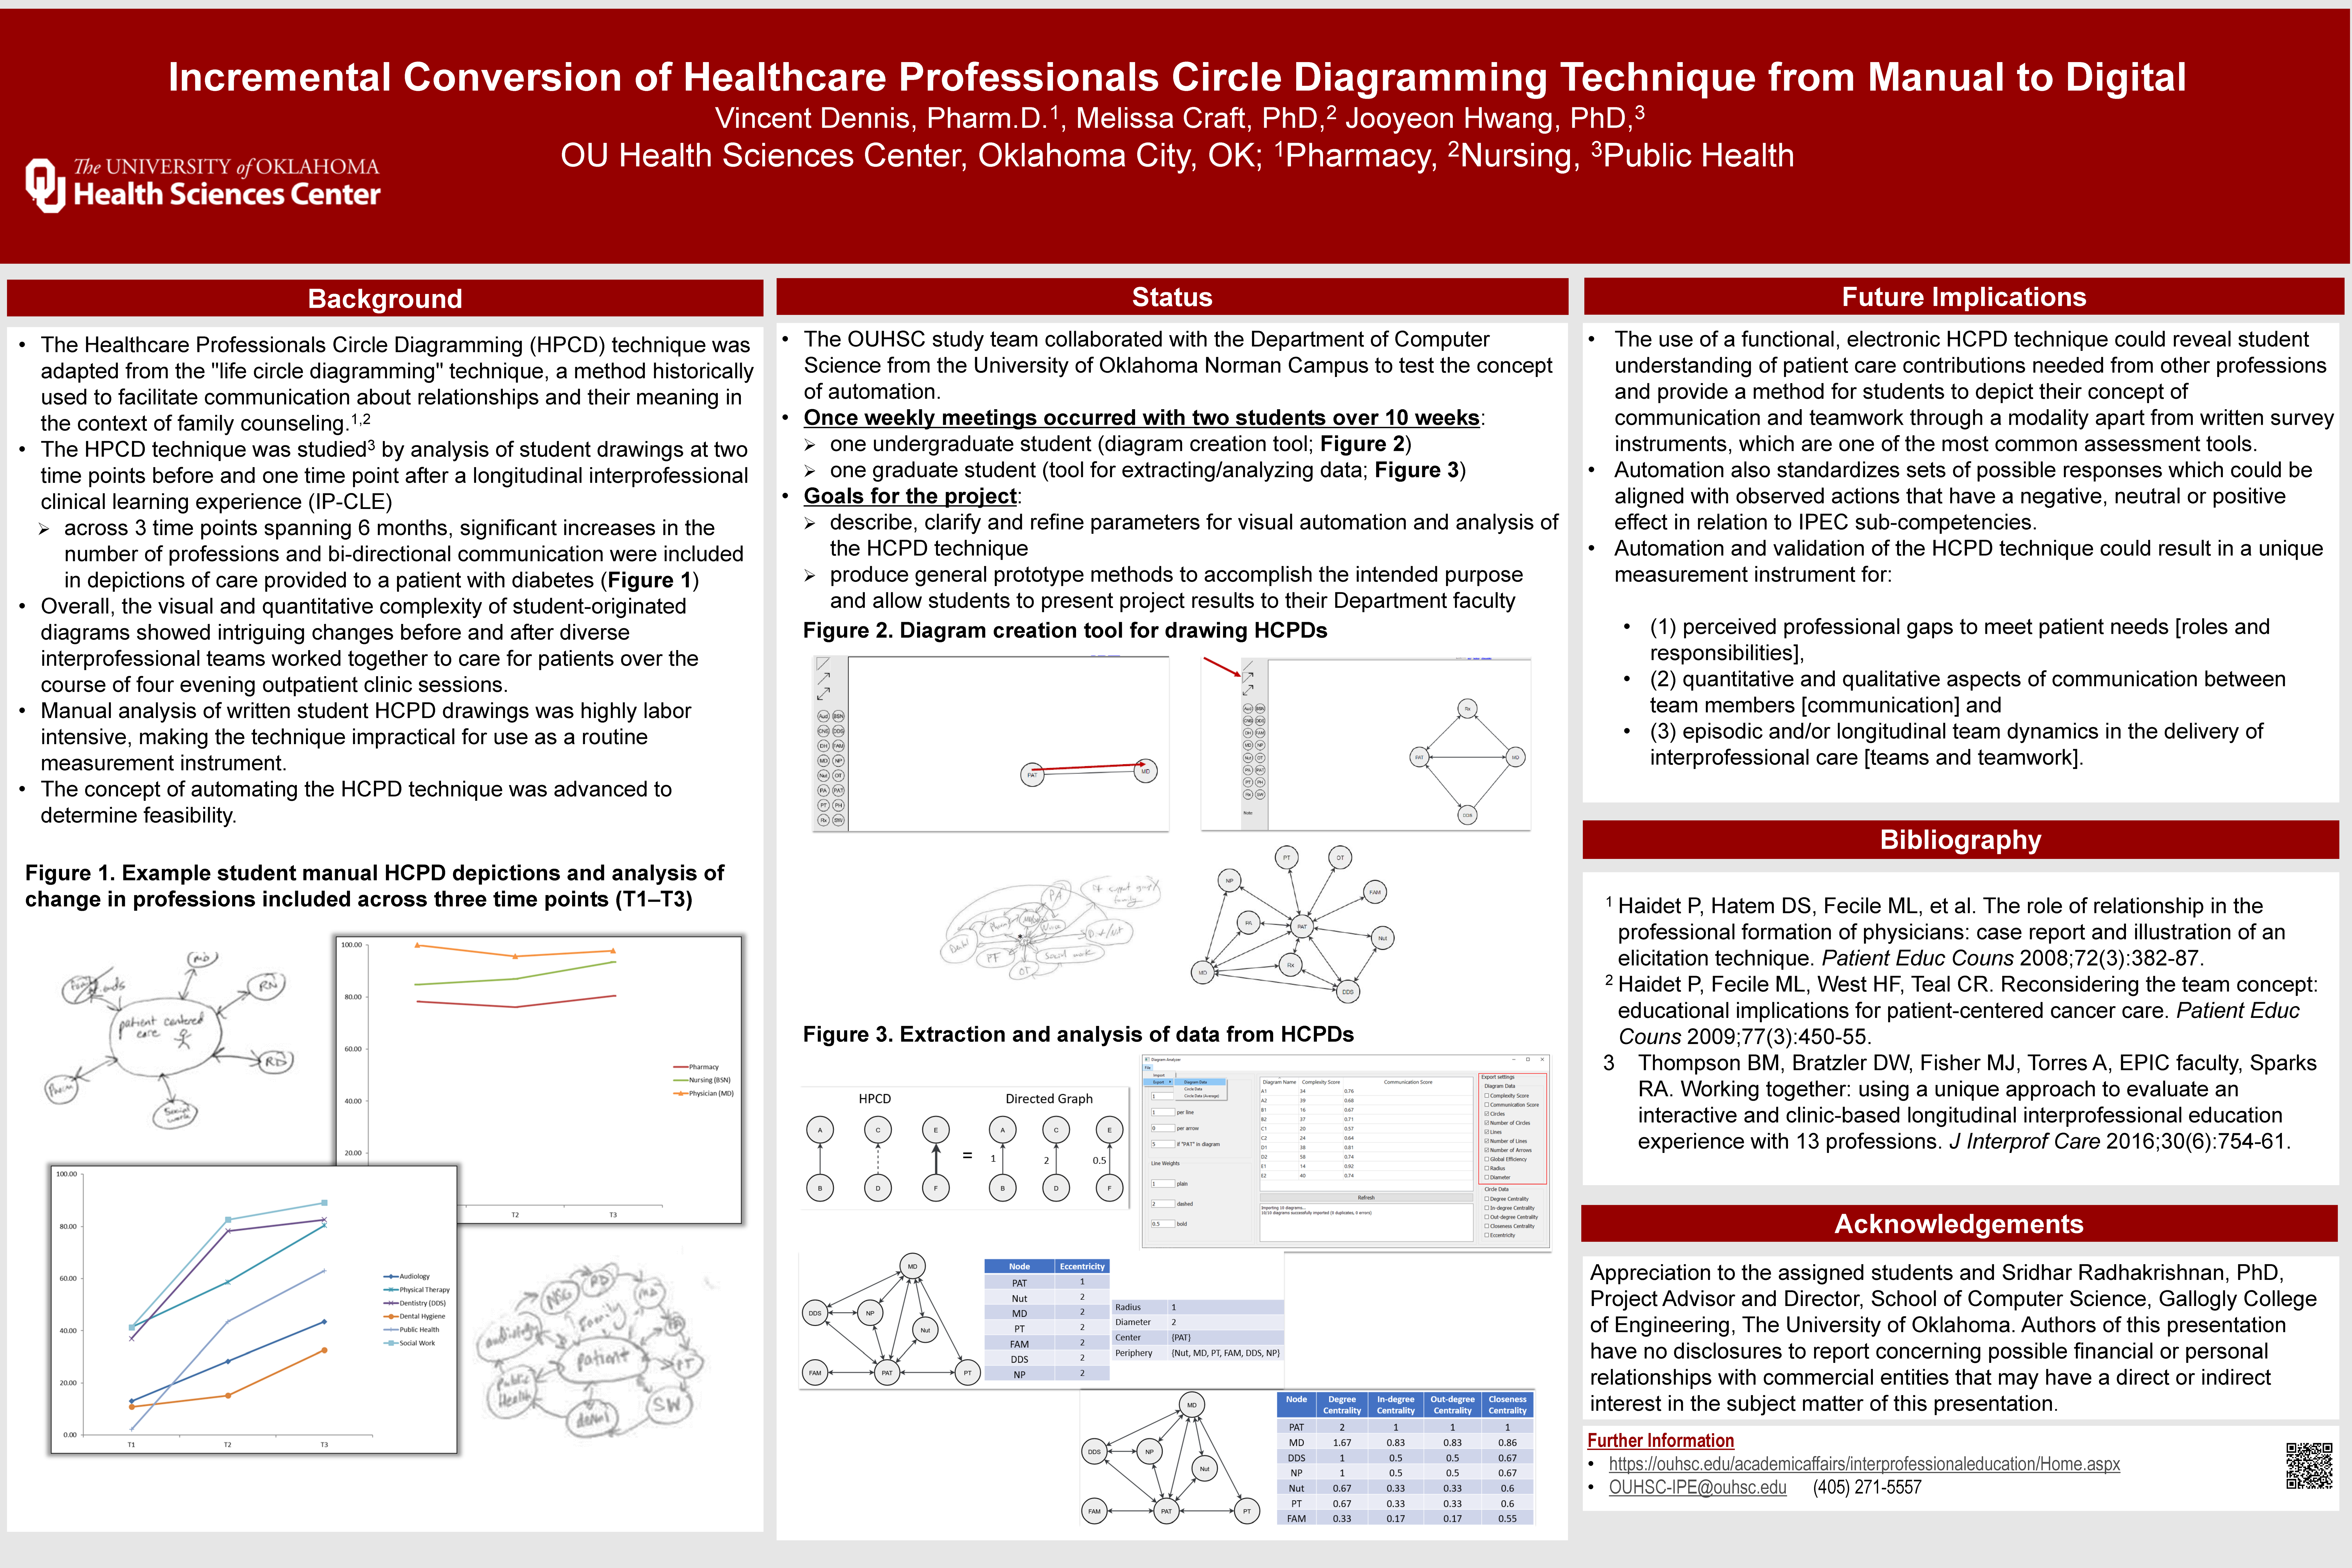 Incremental Conversion of Healthcare Professionals Circle Diagramming Technique from Manual to Digital Poster